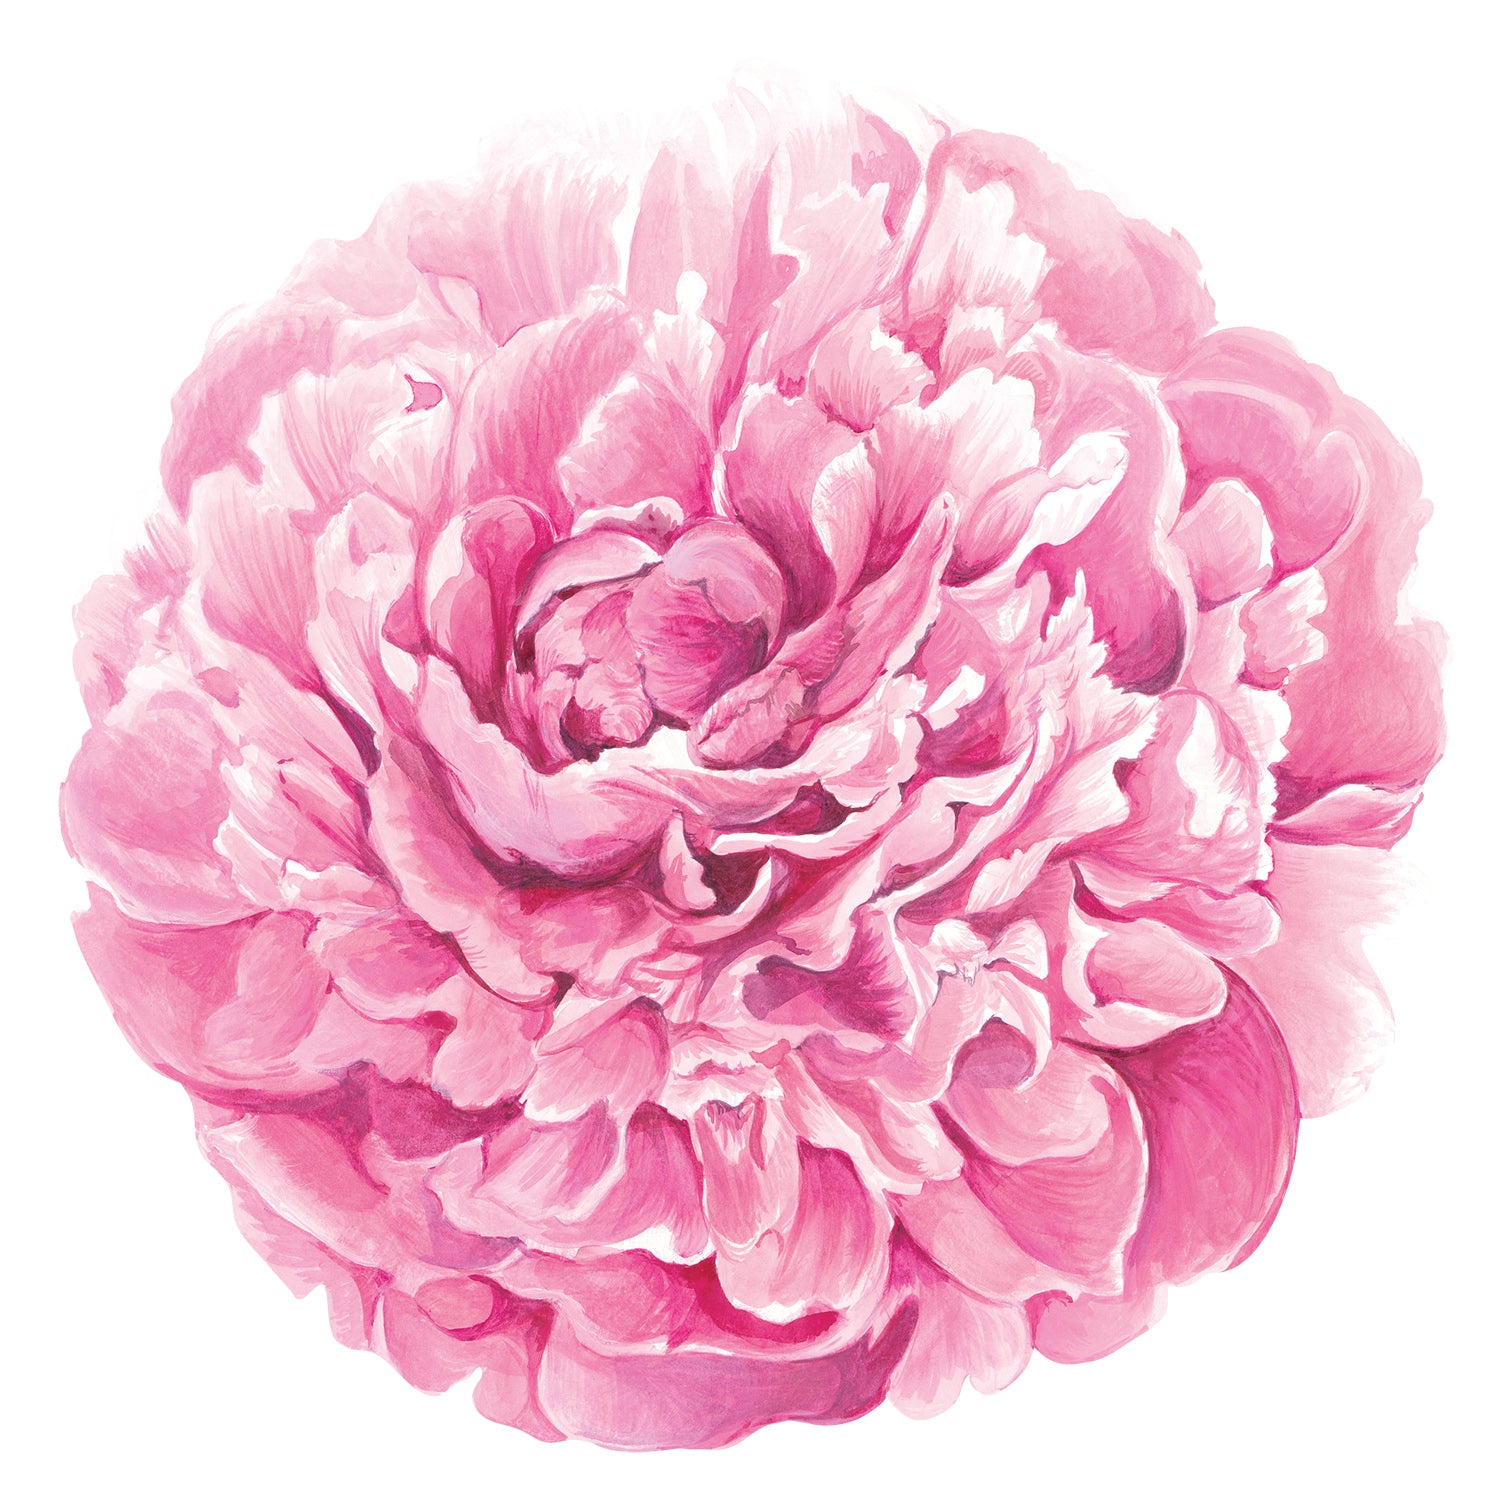 Die-cut Peony Placemat